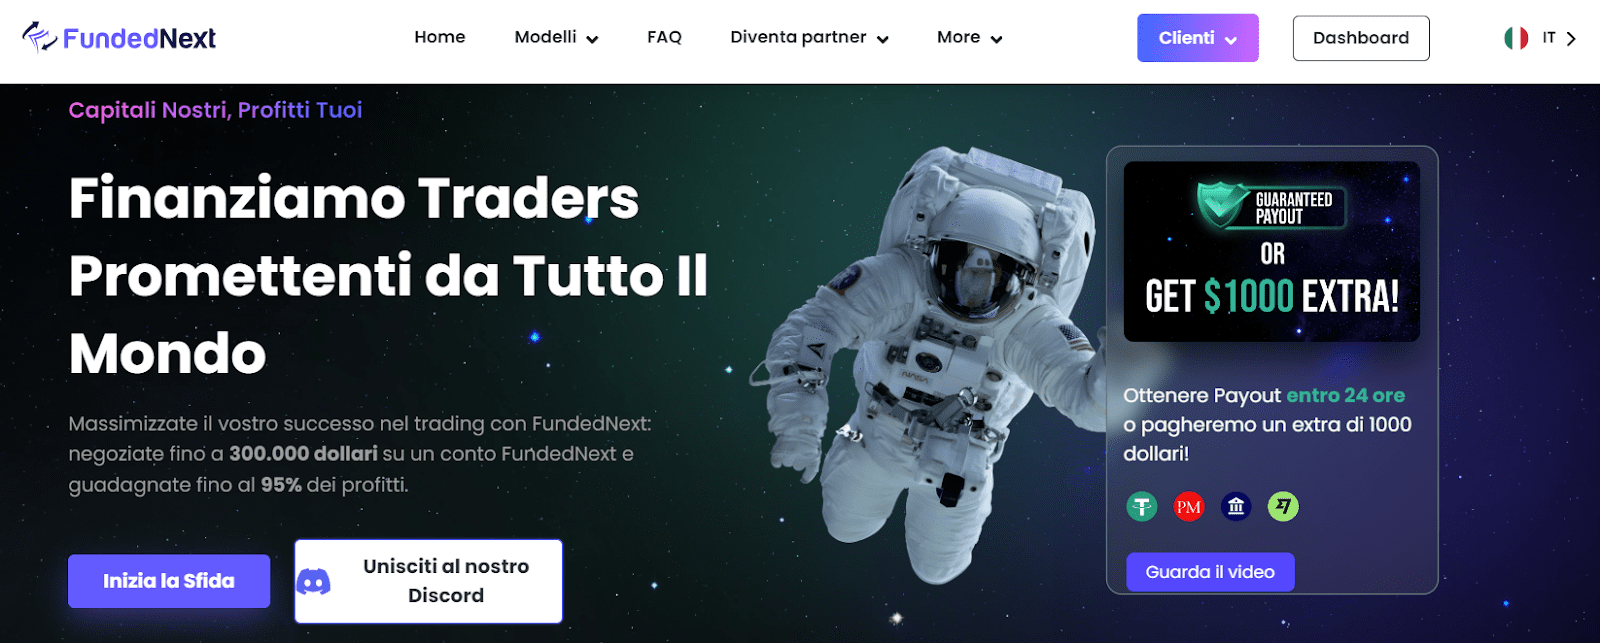 Panoramica Funded Next – Sito web ufficiale